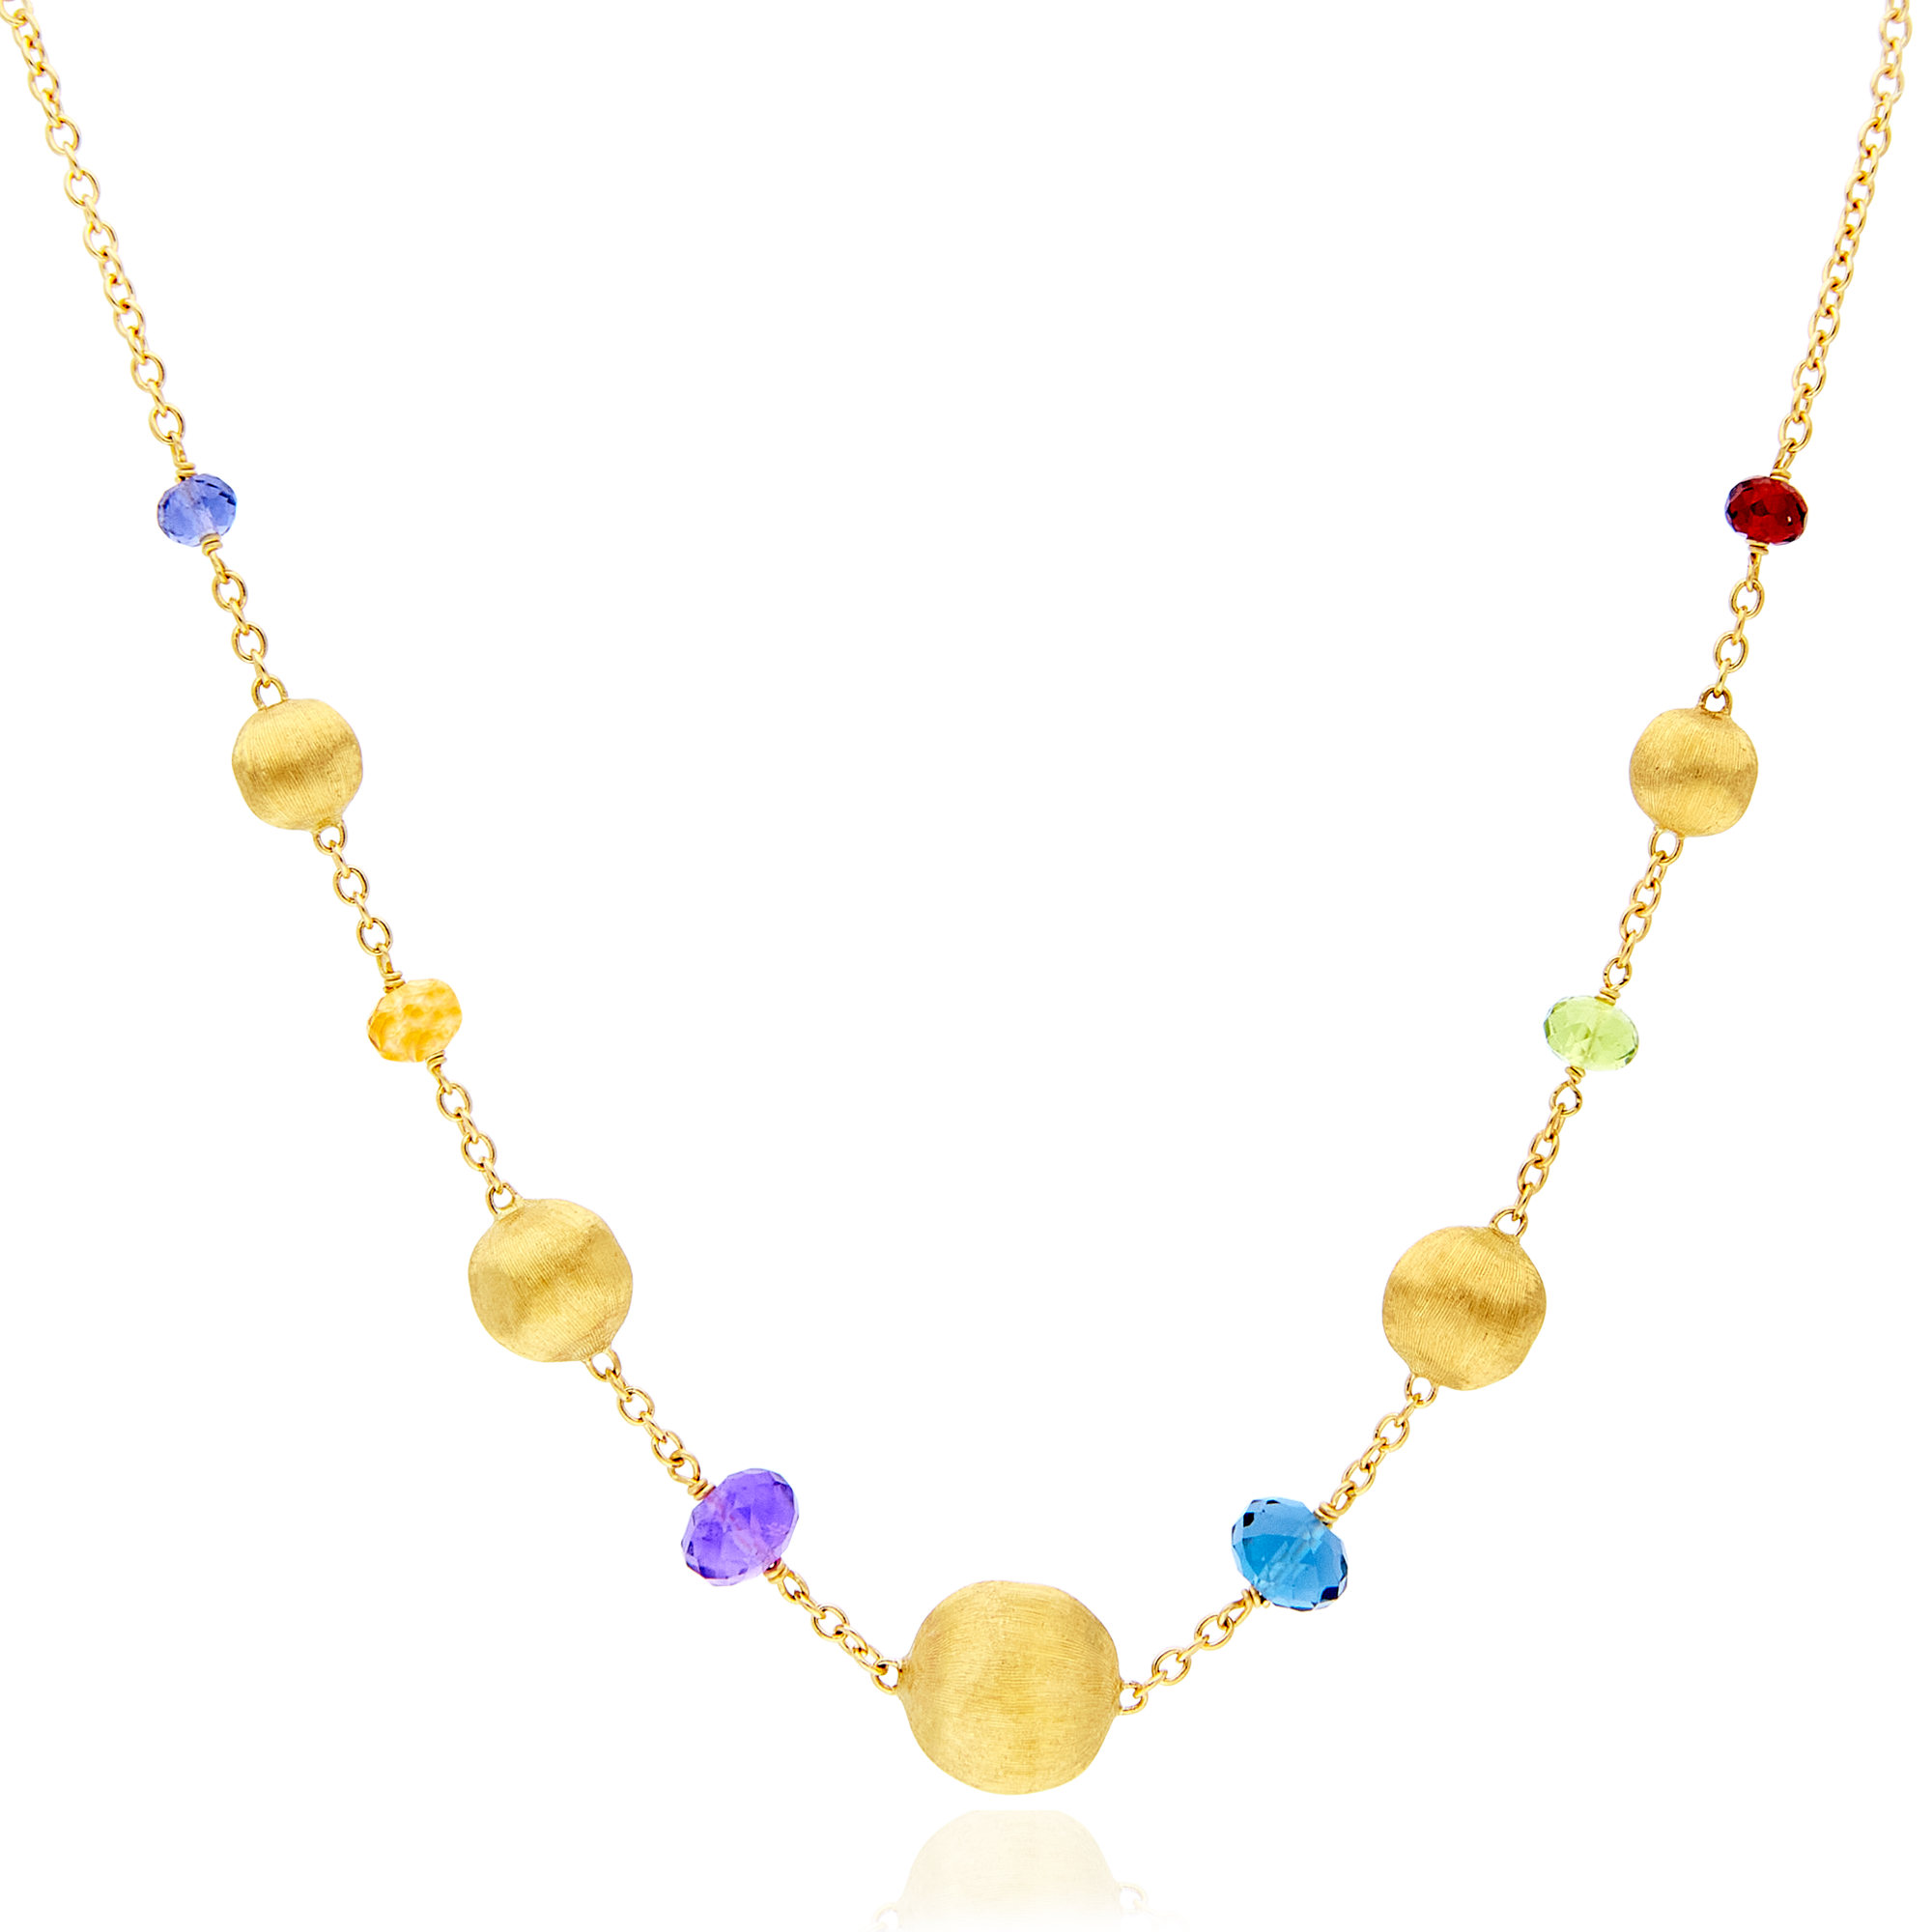 18ct Gold Multi-Gemstone "Africa" Necklace Marco Bicego